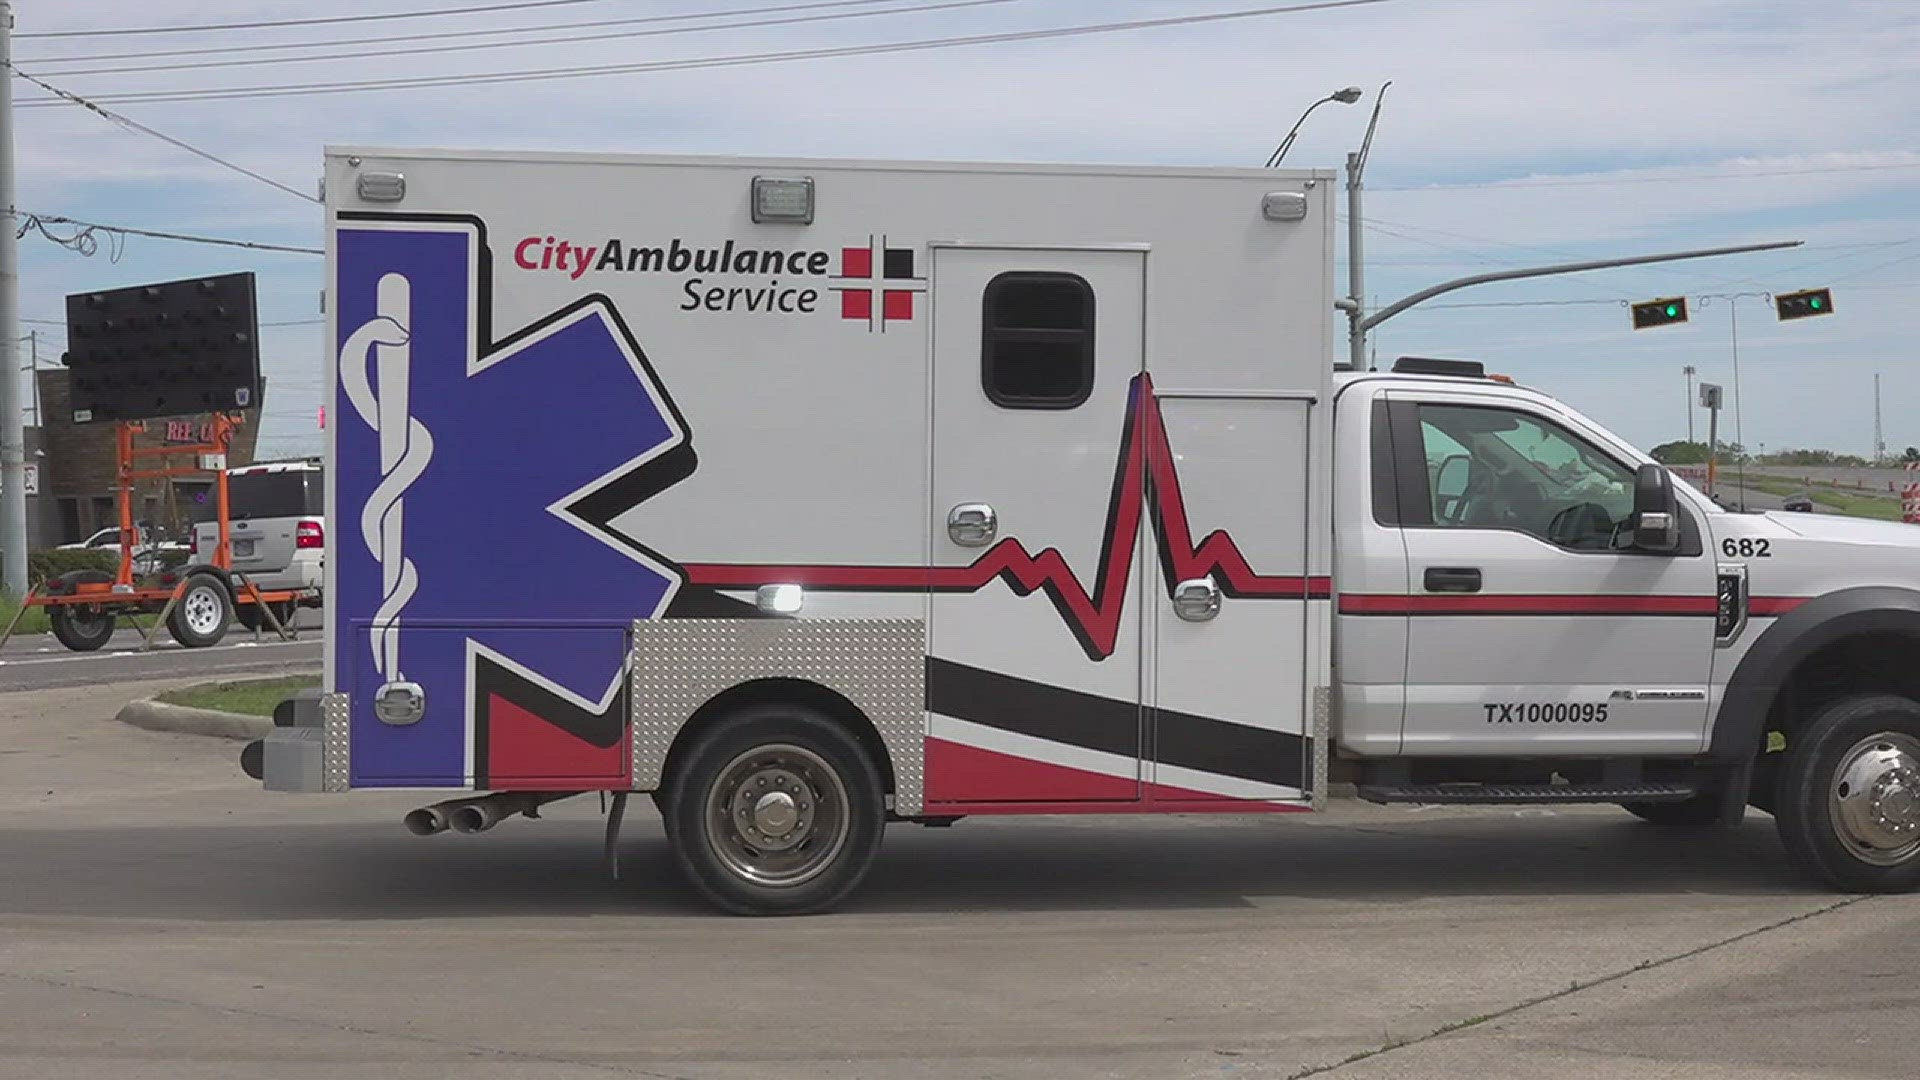 City Ambulance has been the sole emergency provider for the City of Port Arthur after Acadian ended their contract.